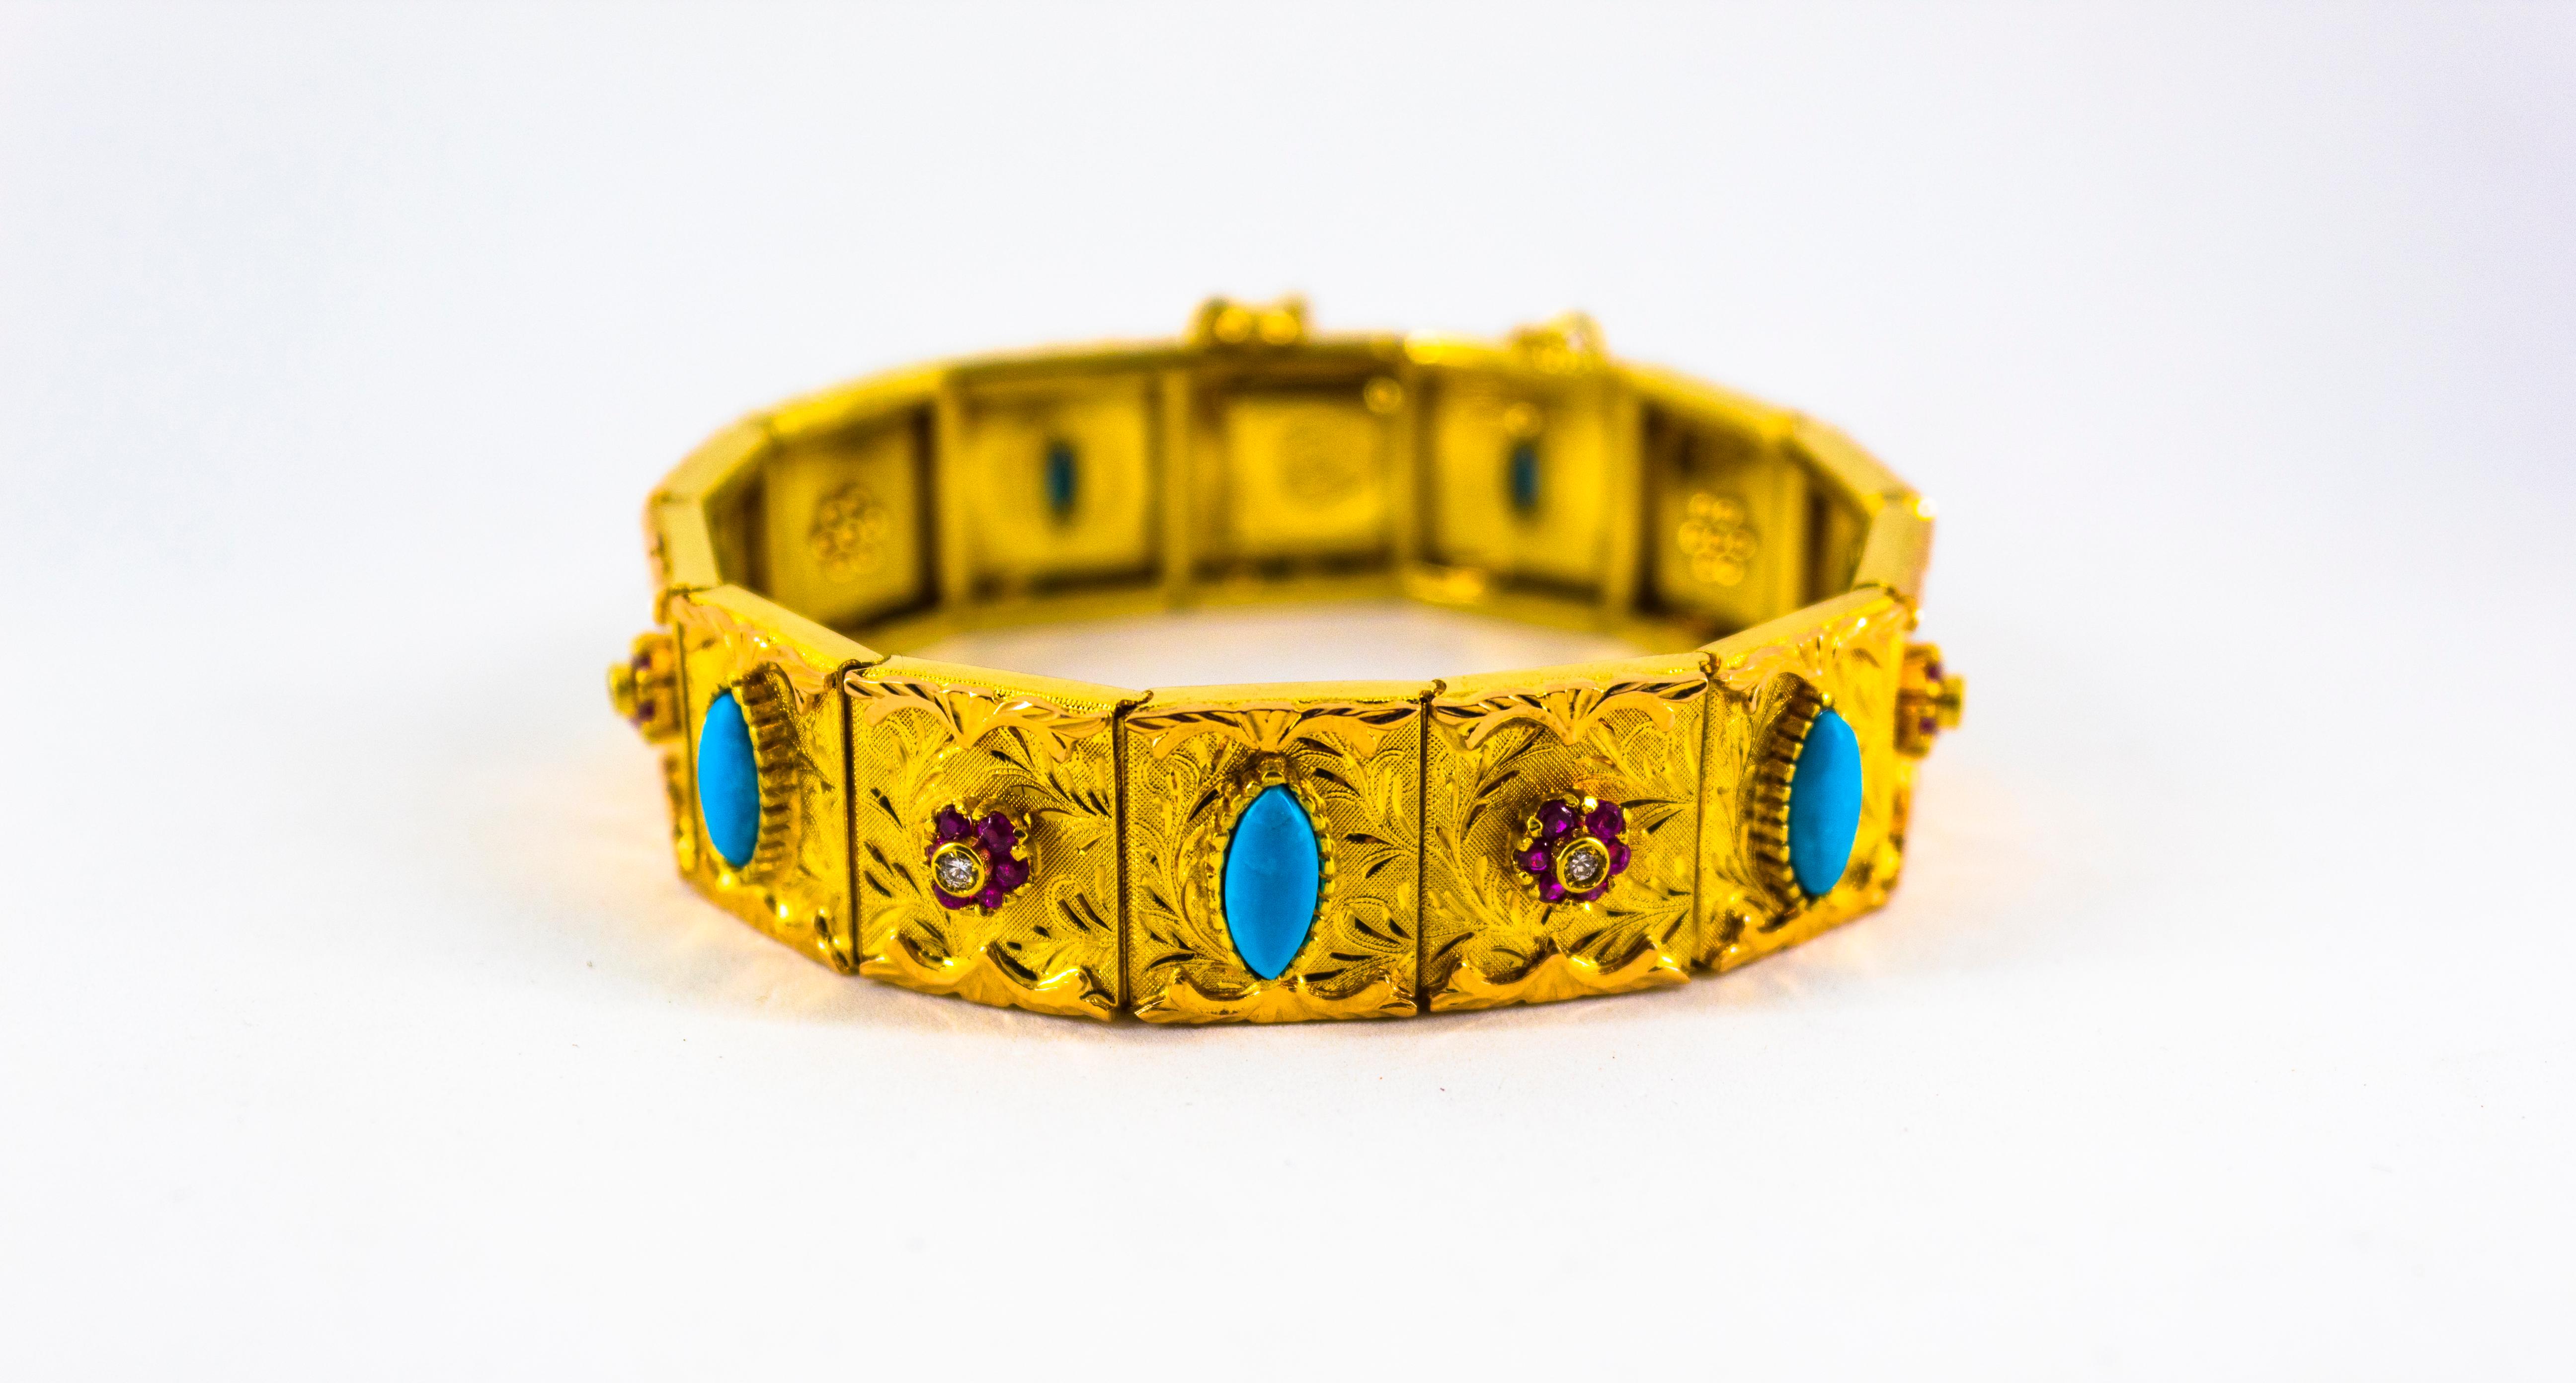 This Bracelet is made of 18K Yellow Gold.
This Bracelet has 0.25 Carats of White Diamond.
This Bracelet has 1.40 Carats of Rubies.
This Bracelet has also Turquoise.
This Bracelet is inspired by Art Nouveau.
We're a workshop so every piece is